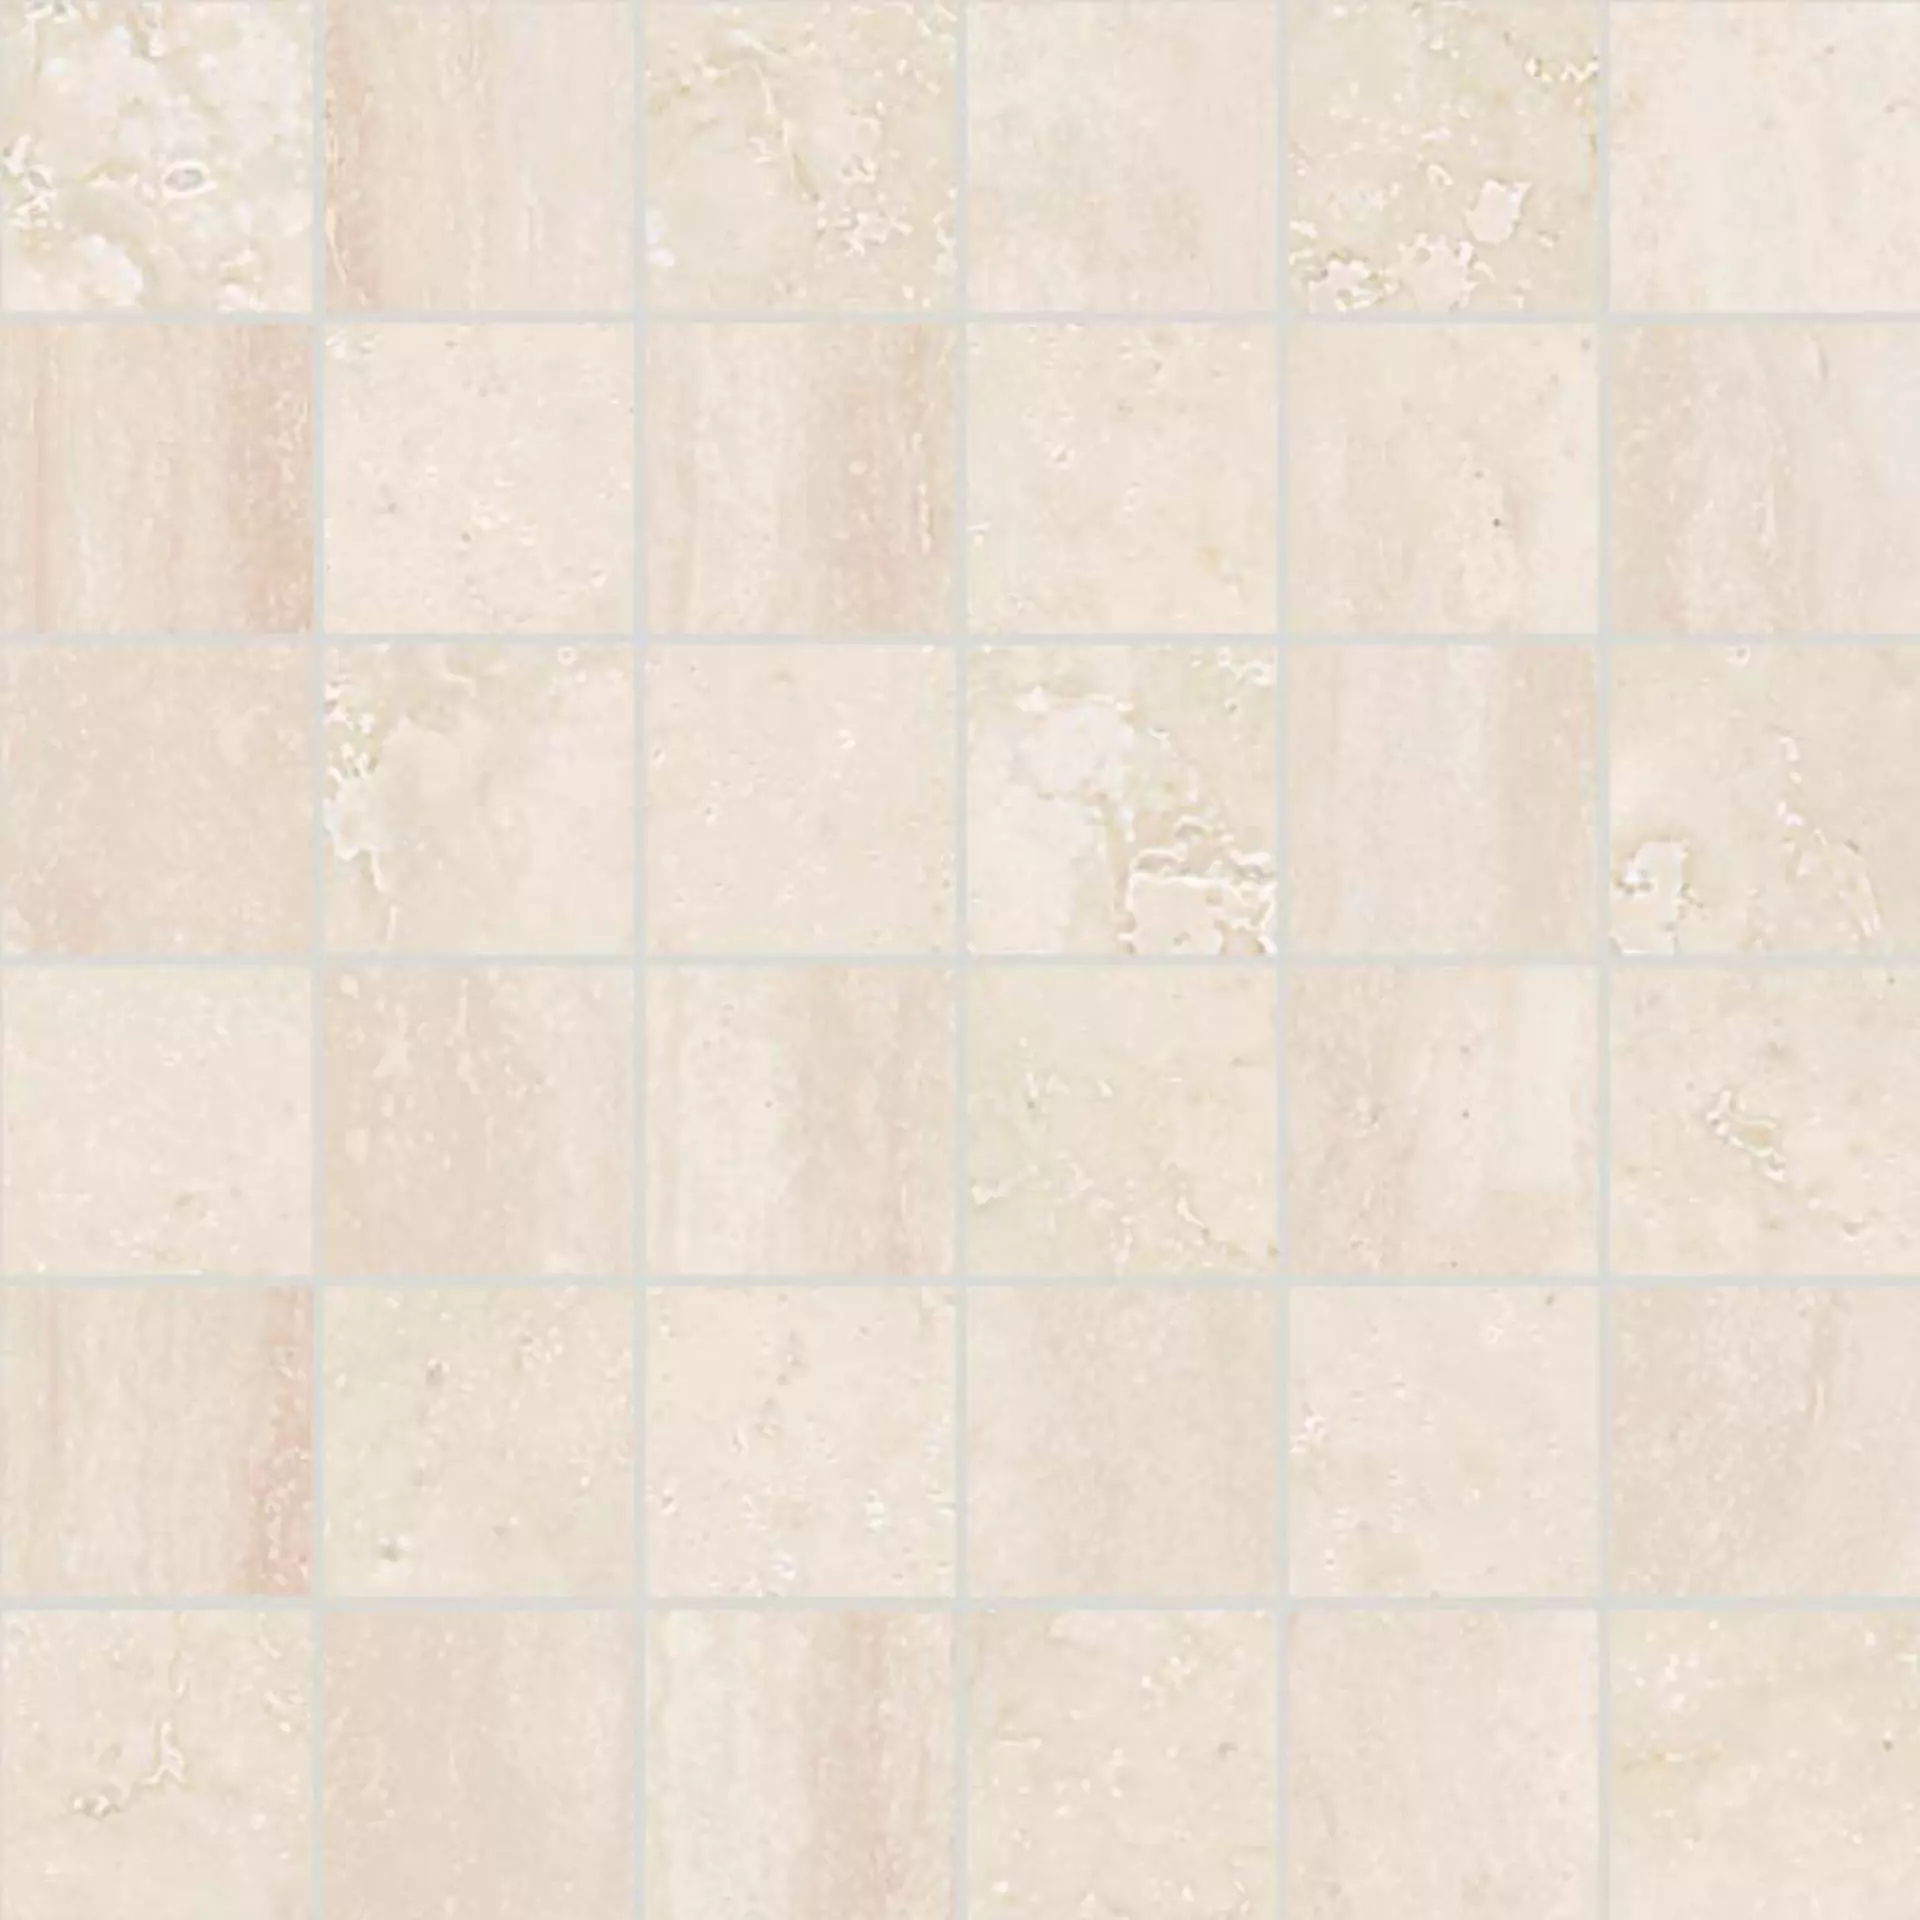 Sant Agostino Via Appia Ivory Natural Mosaic CSAMAVCI30 30x30cm rectified 10mm